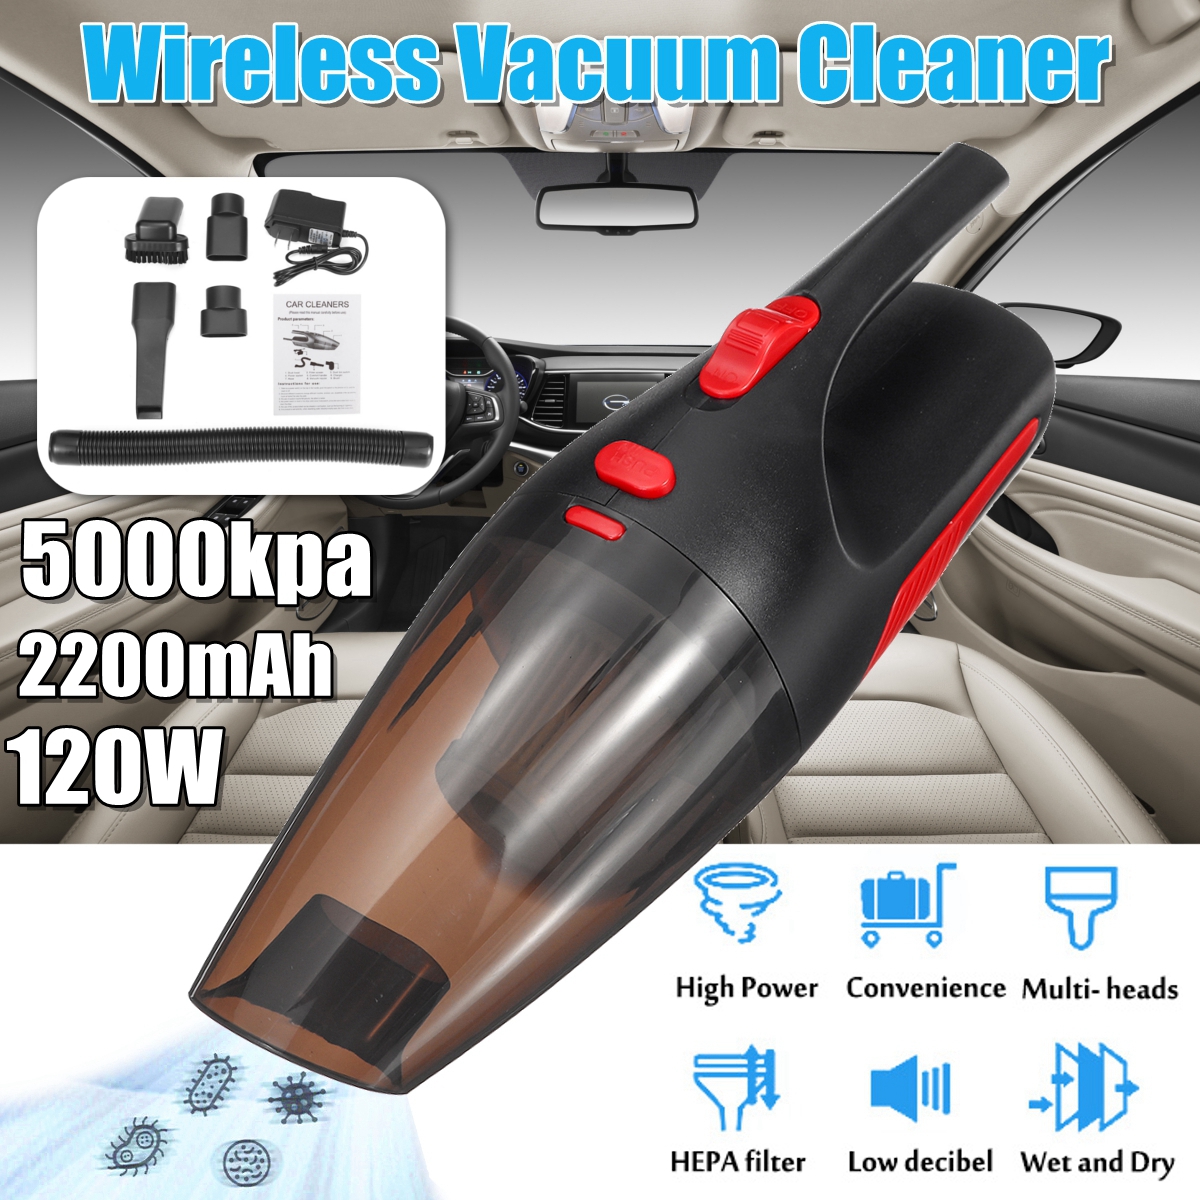 5000kpa Strong Power Car Vacuum Cleaner DC 12 Volt 120W Handheld Wet/Dry Auto Portable Vacuum Cleaner 10